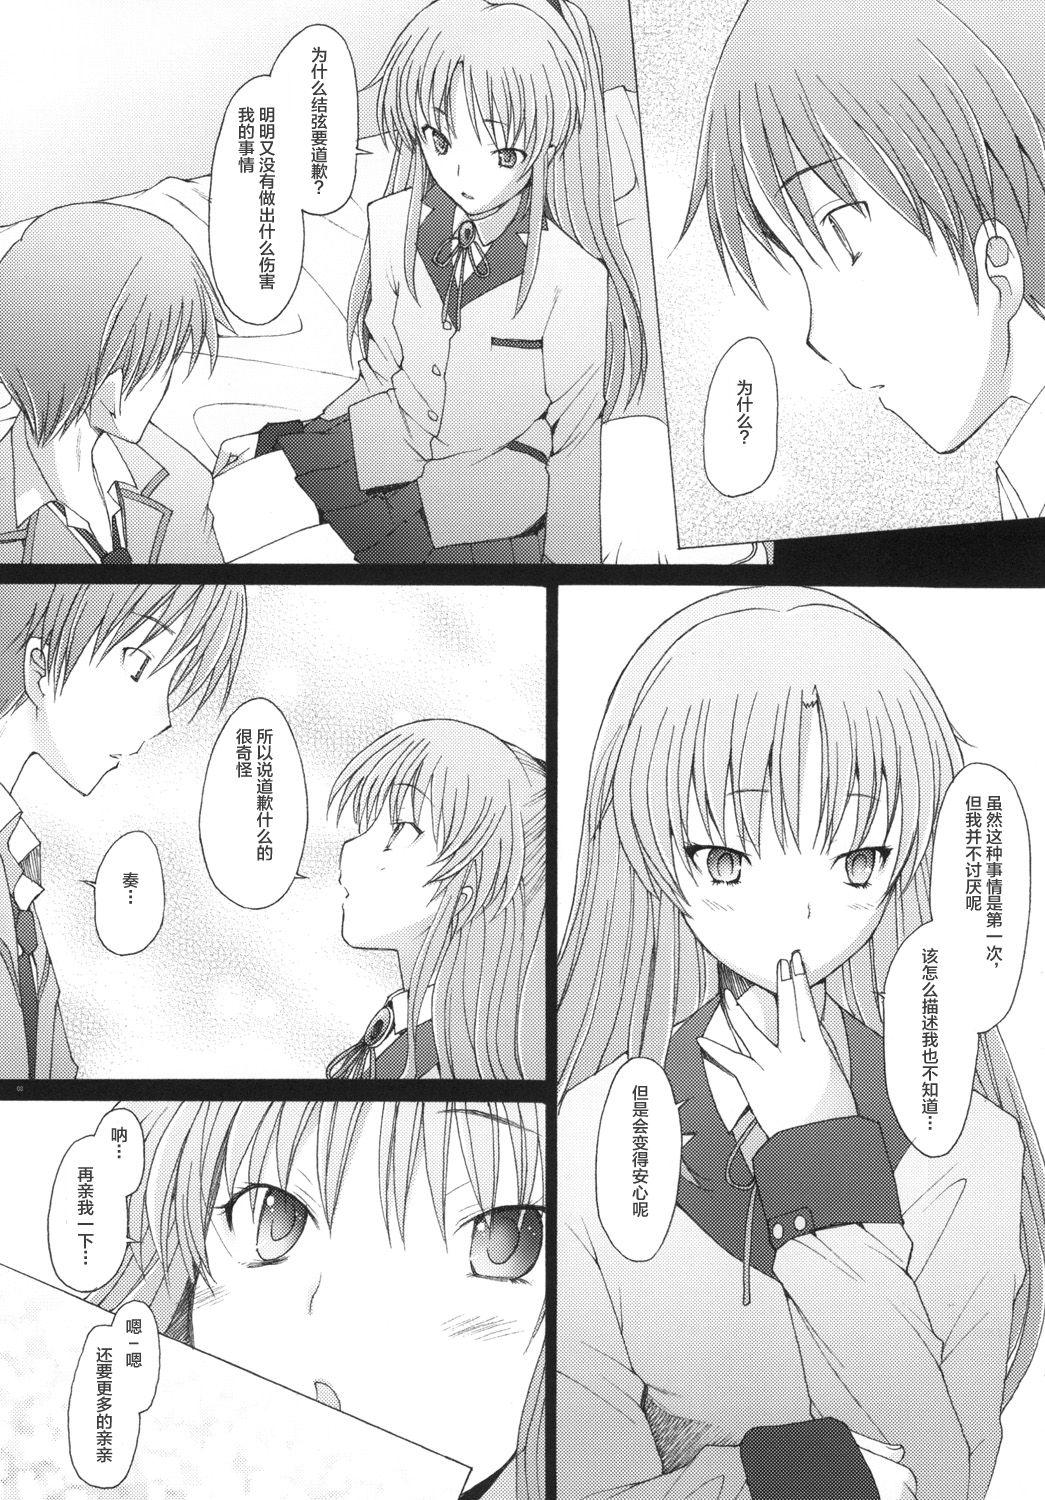 European Porn Holy Silence - Angel beats Cheating - Page 8